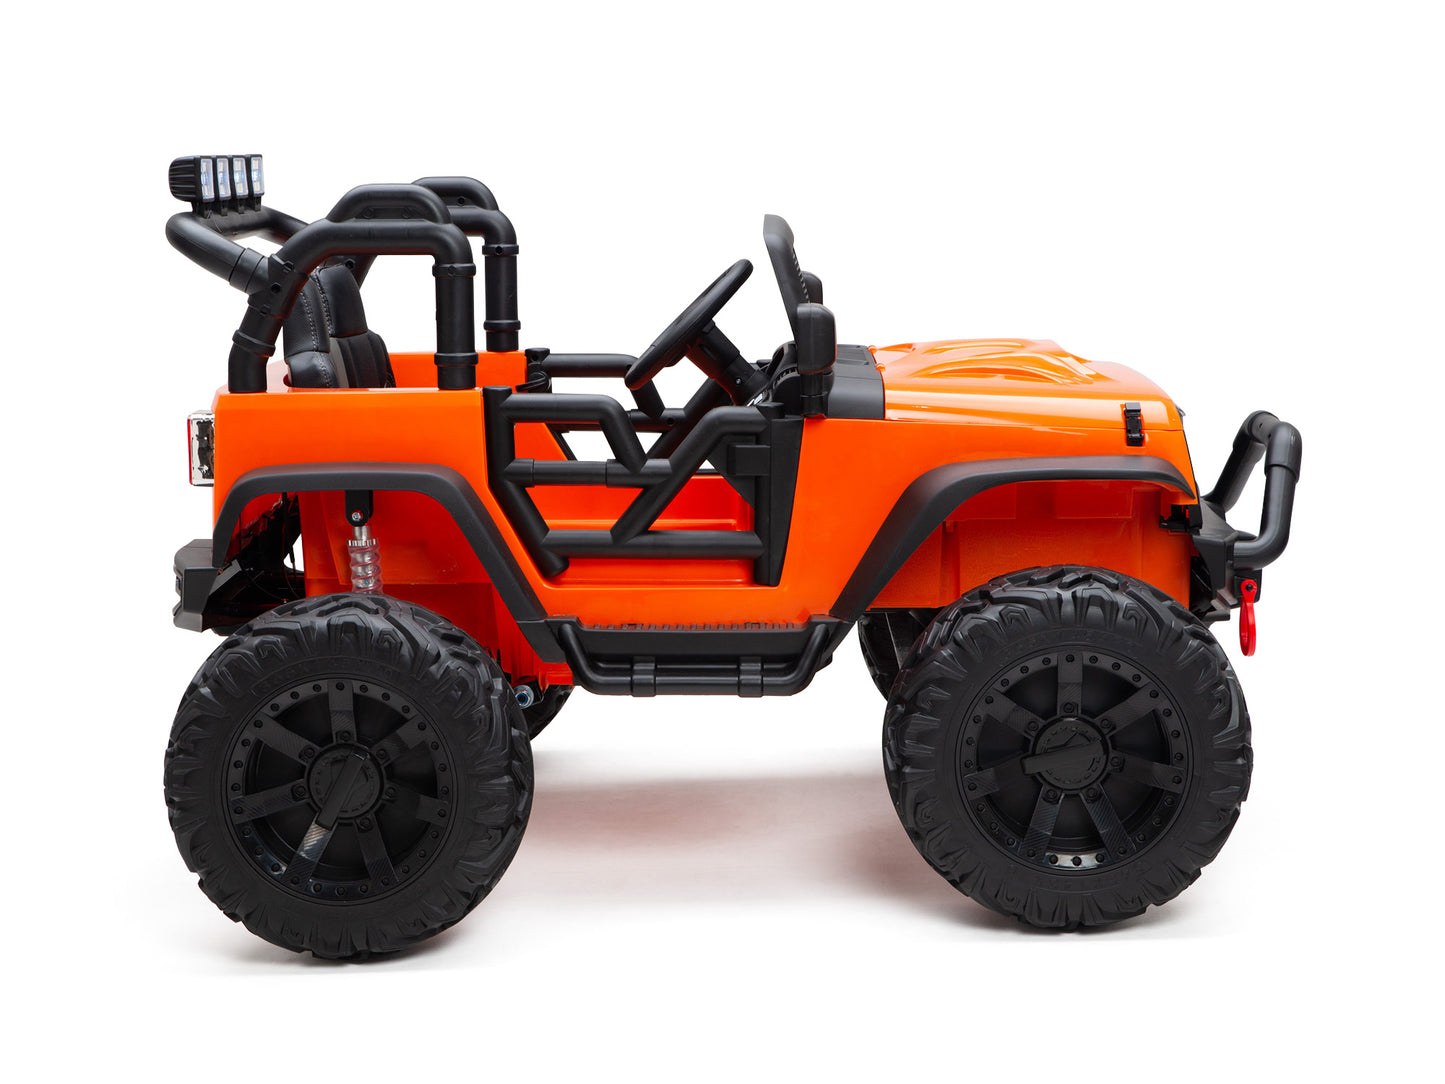 Nighthawk Kids 24V Battery Operated Ride On Truck With Remote - Orange